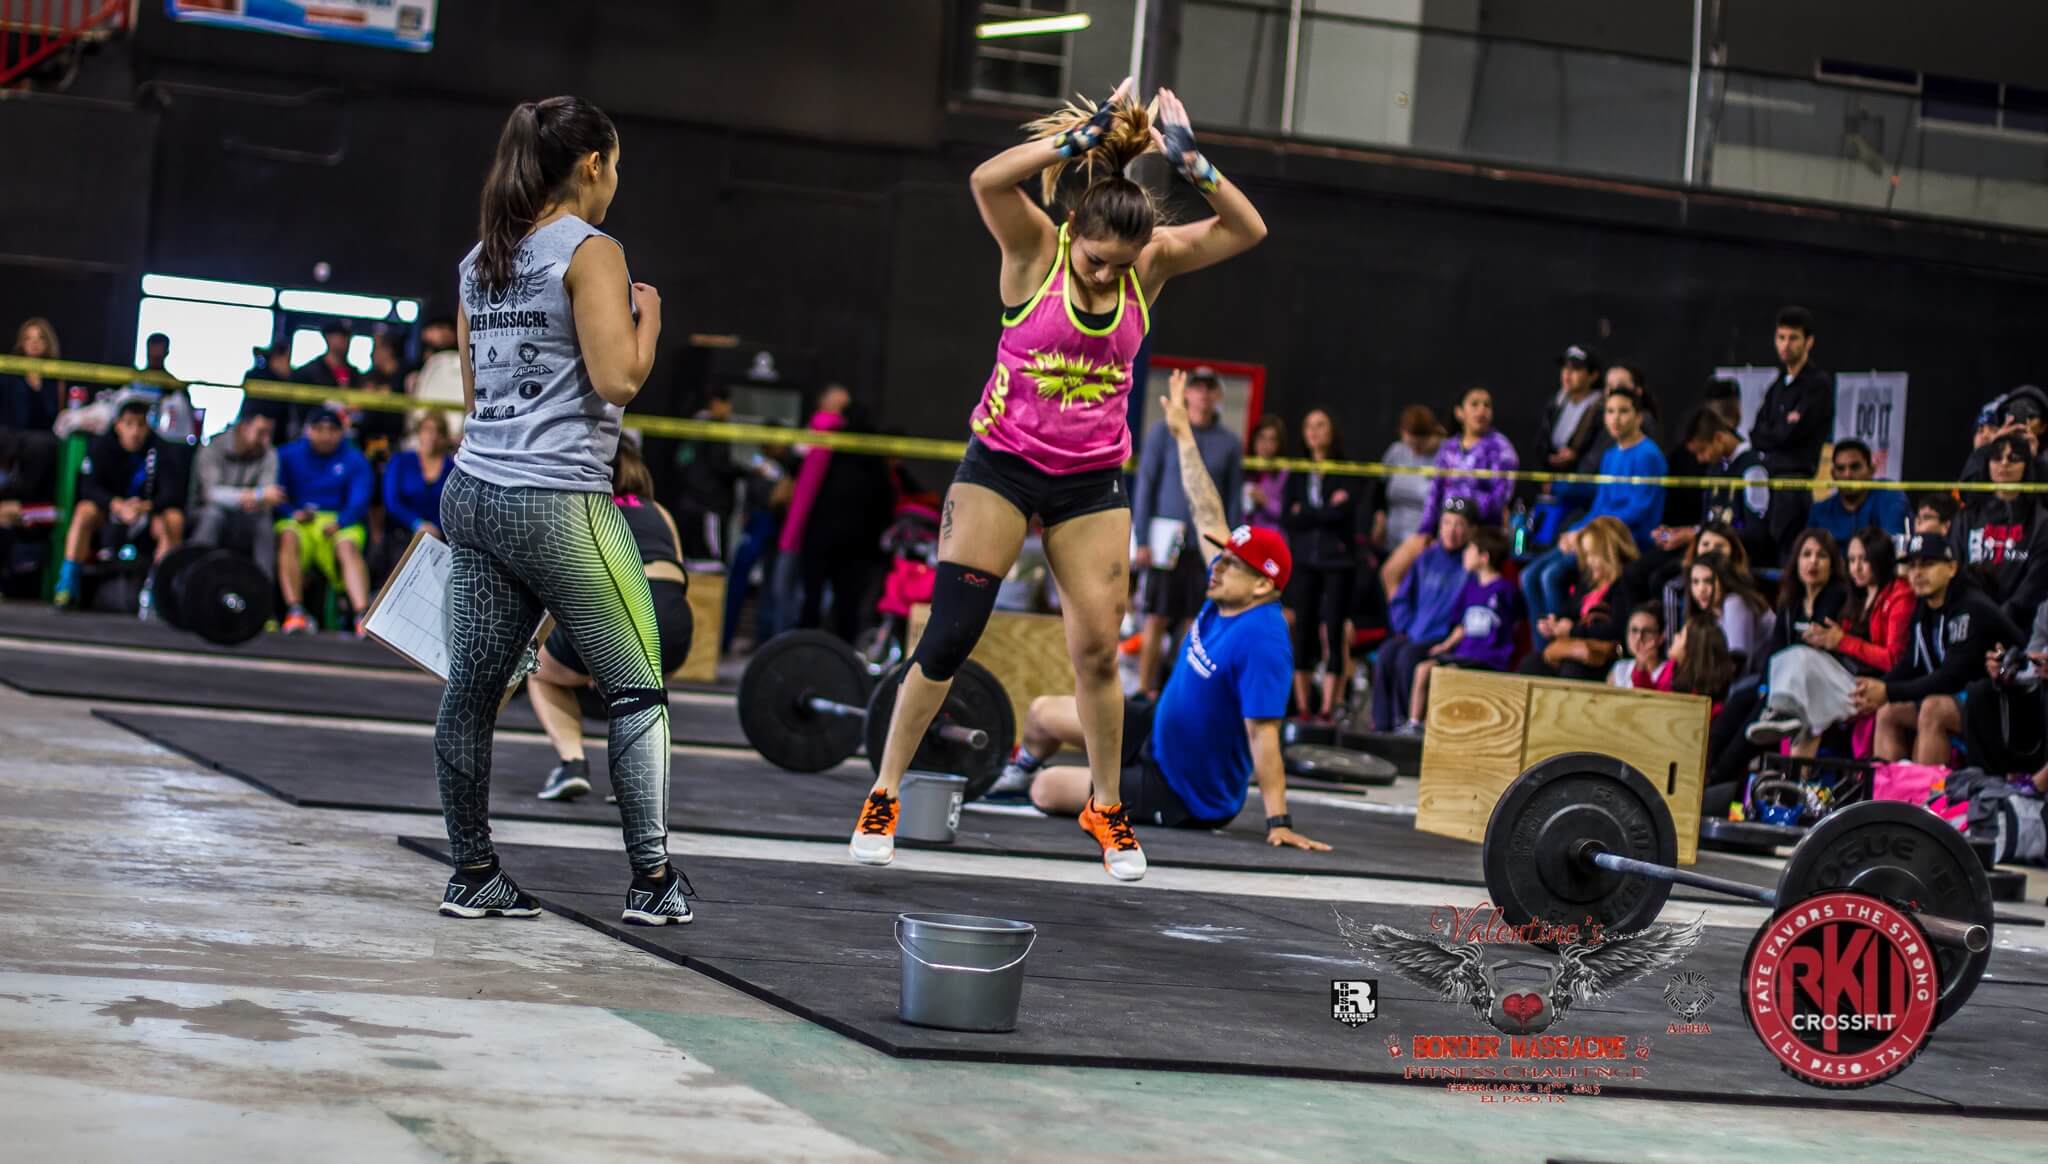 People who crossfit are extremely passionate about their sport